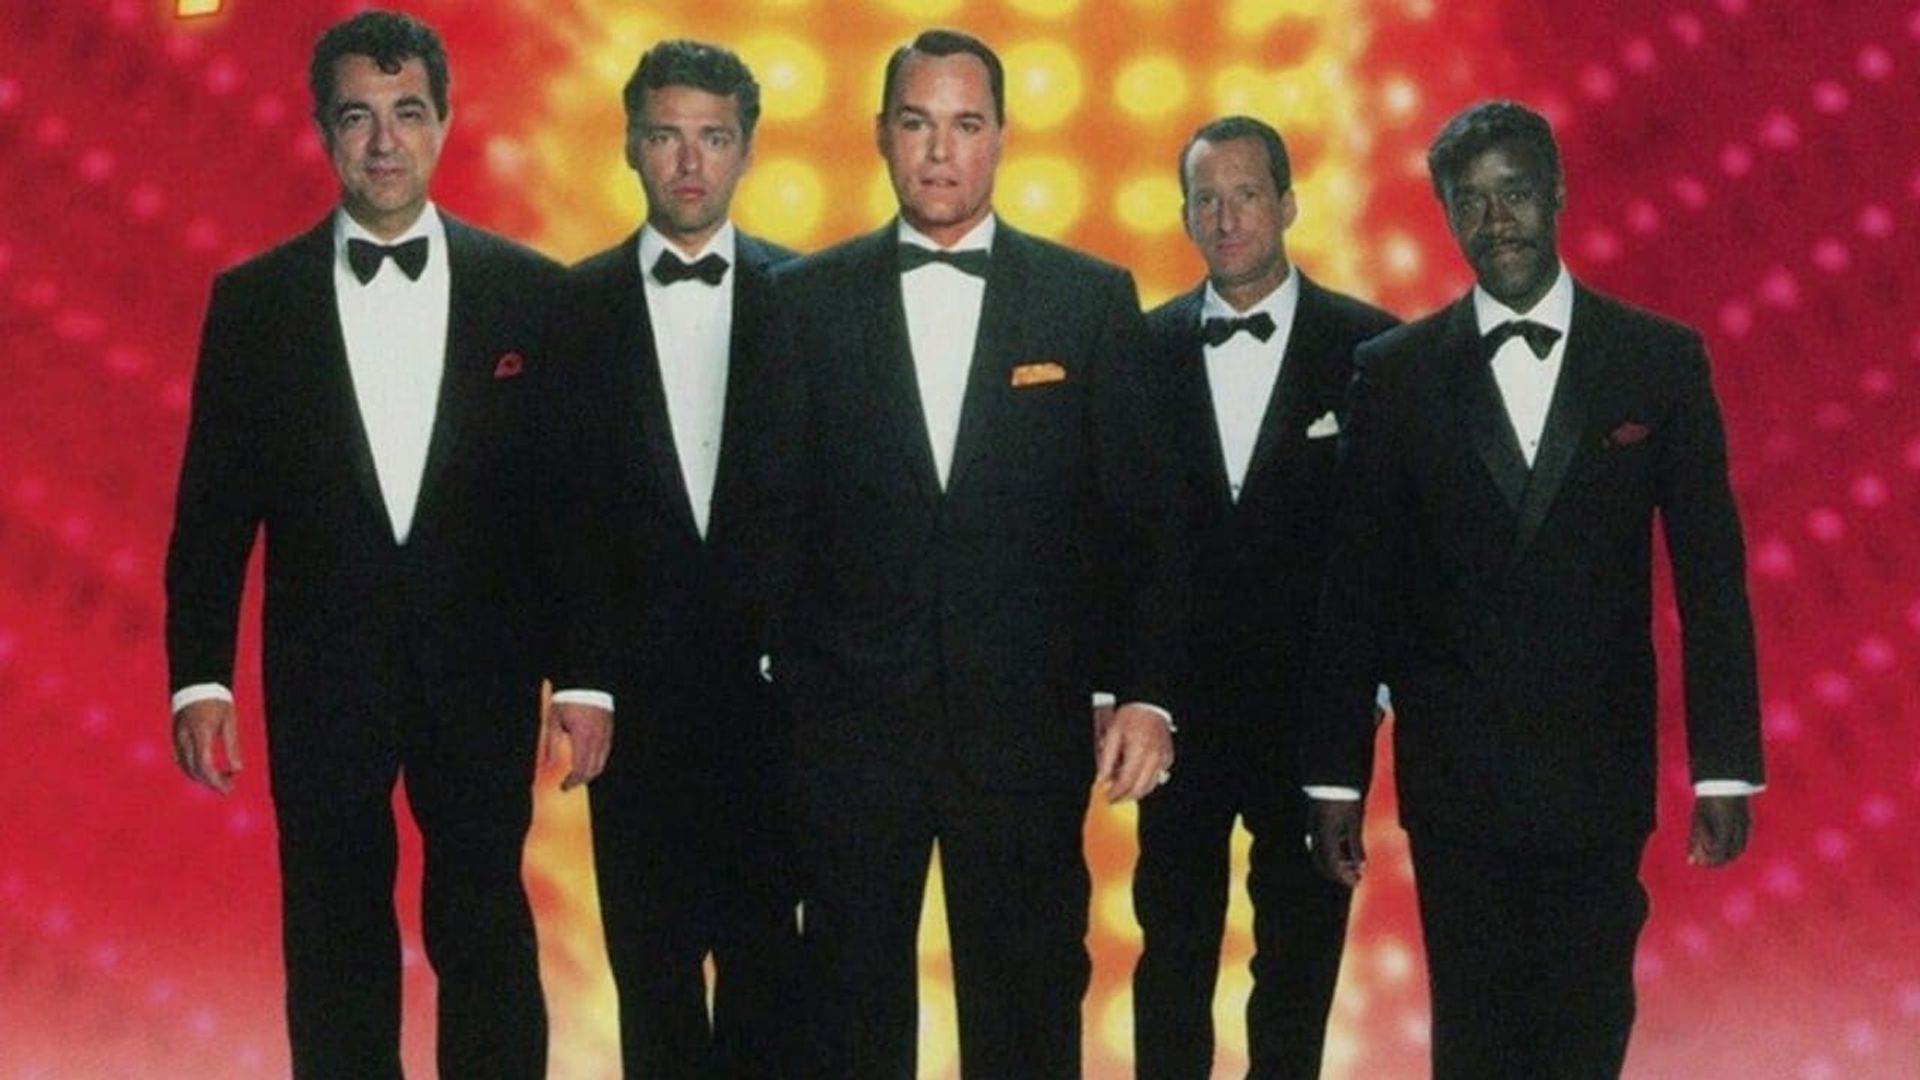 The Rat Pack background